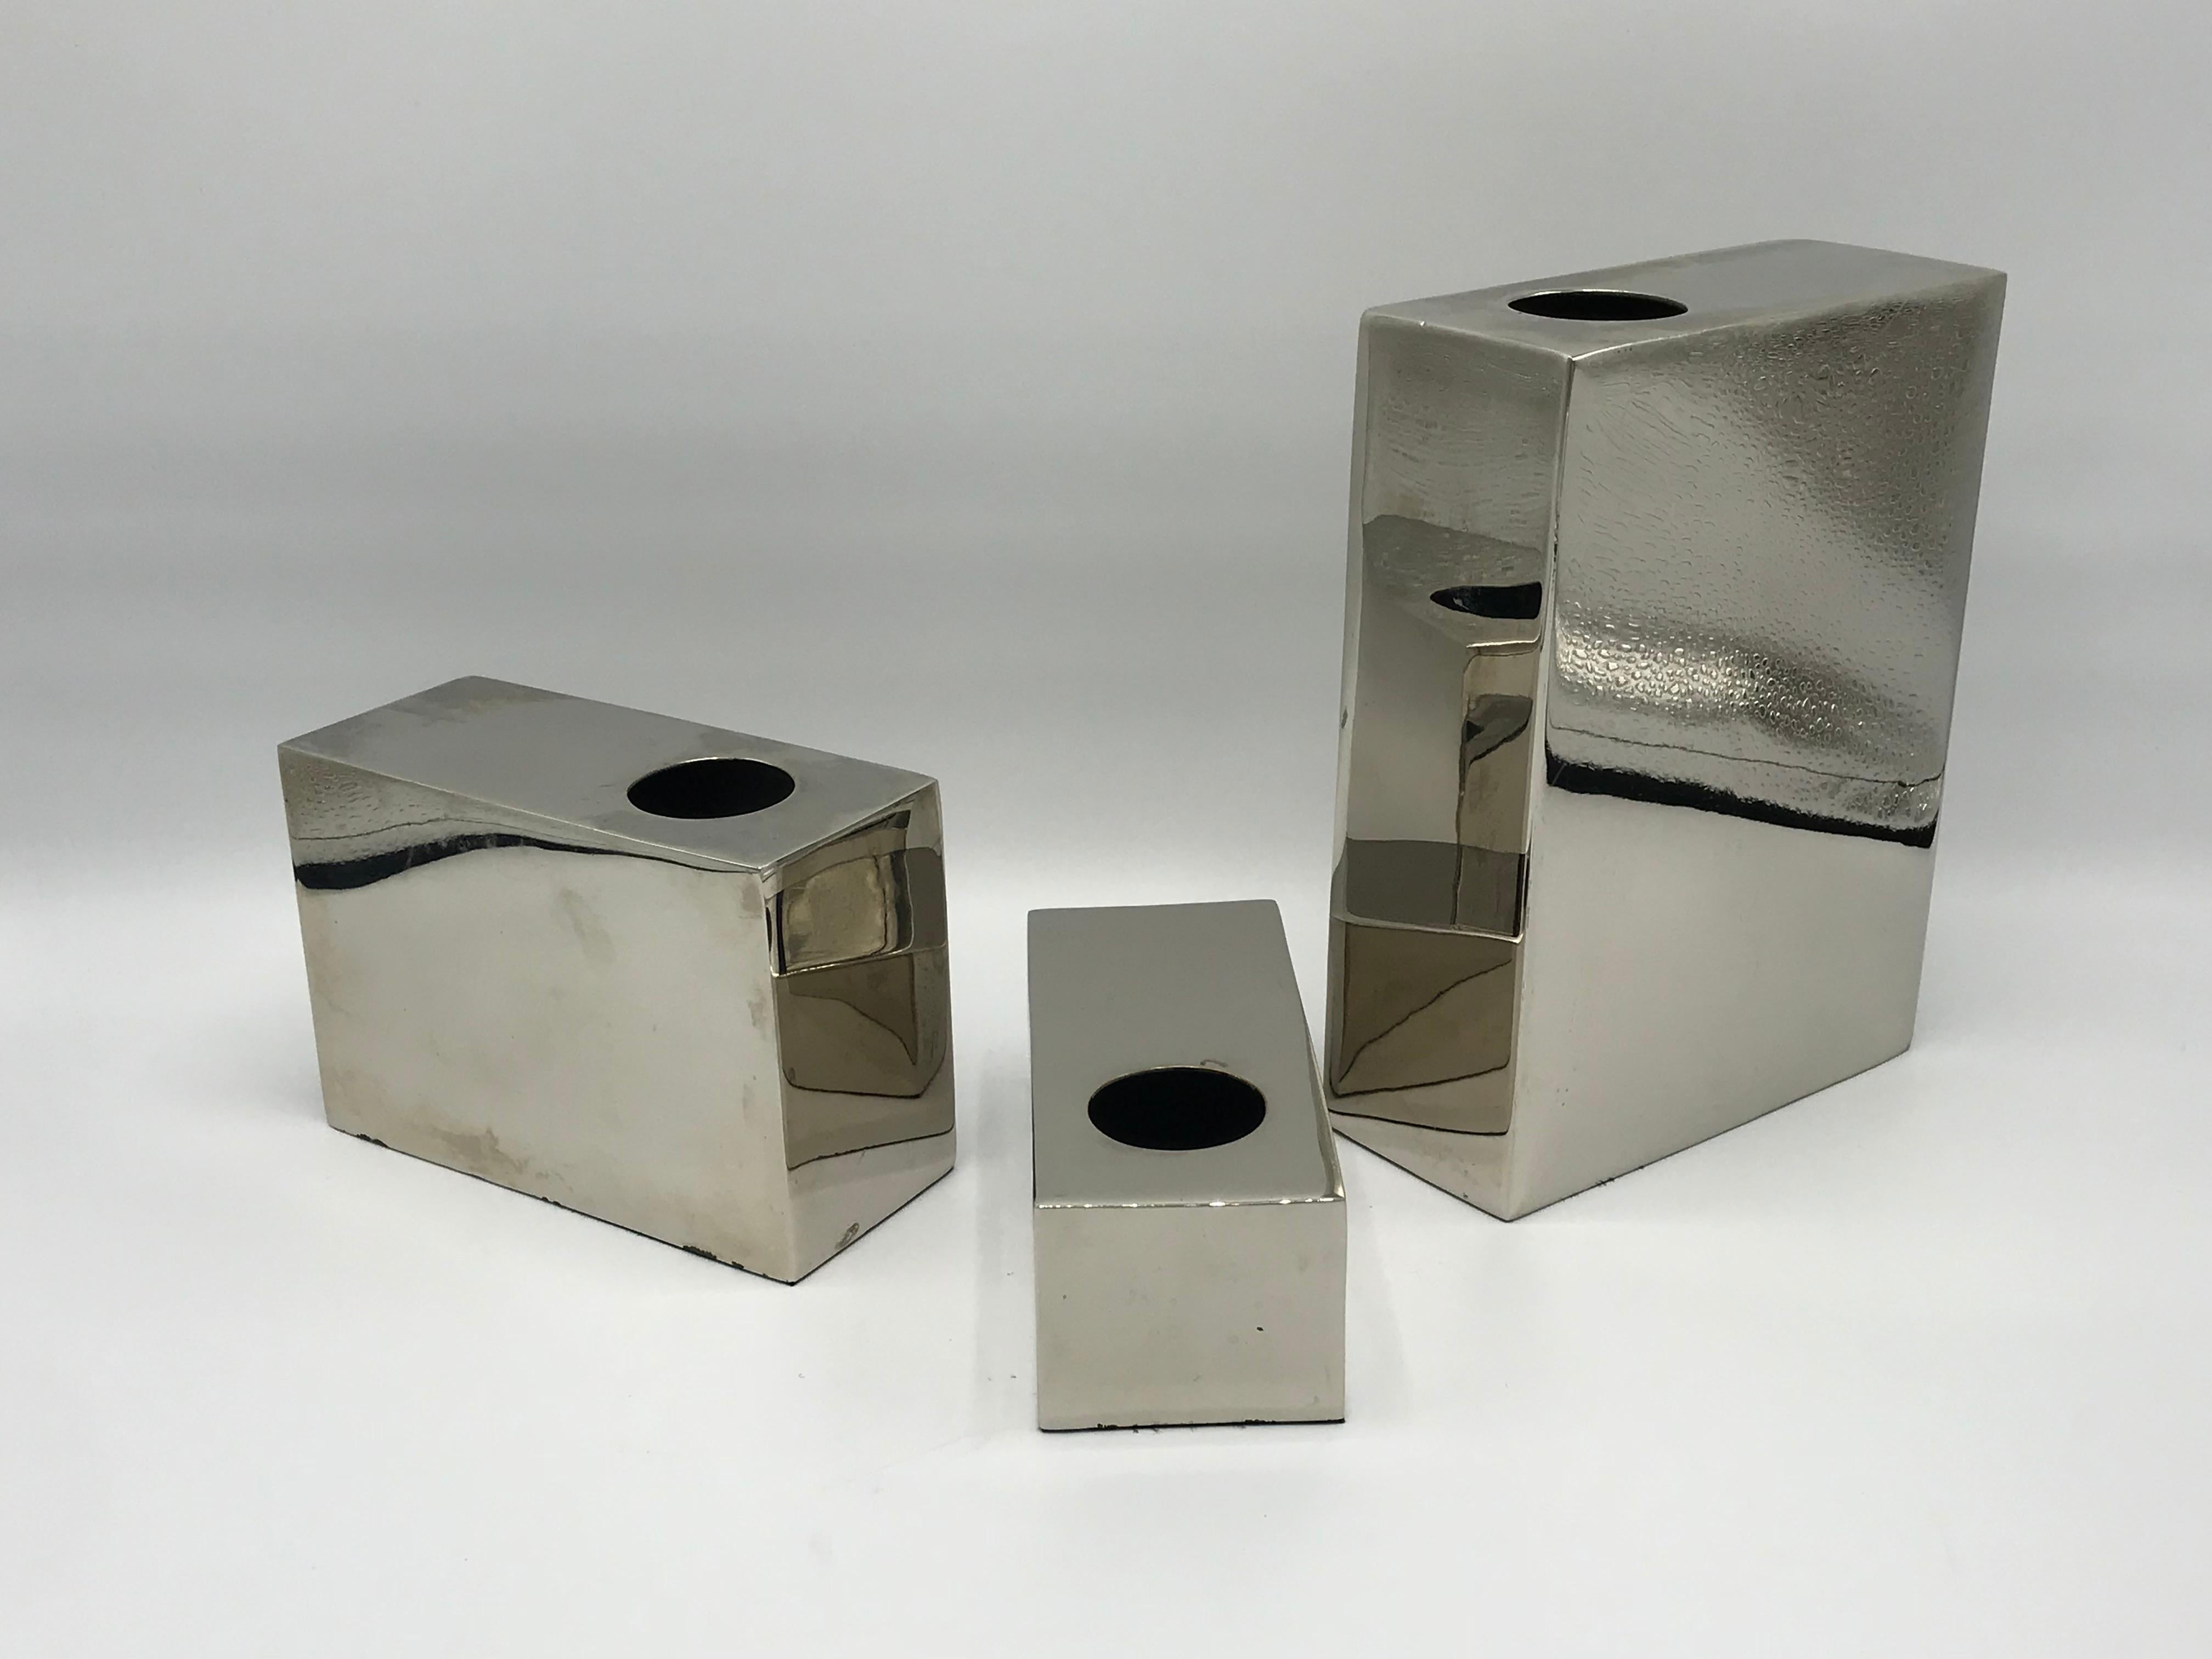 Listed is a gorgeous, set of three, 1970s Milo Baughman style chrome cube vases. Heavy, weighing nearly 5lbs for the set. 

Measures: Large 8in H
Medium 4in H
Small 2in H.